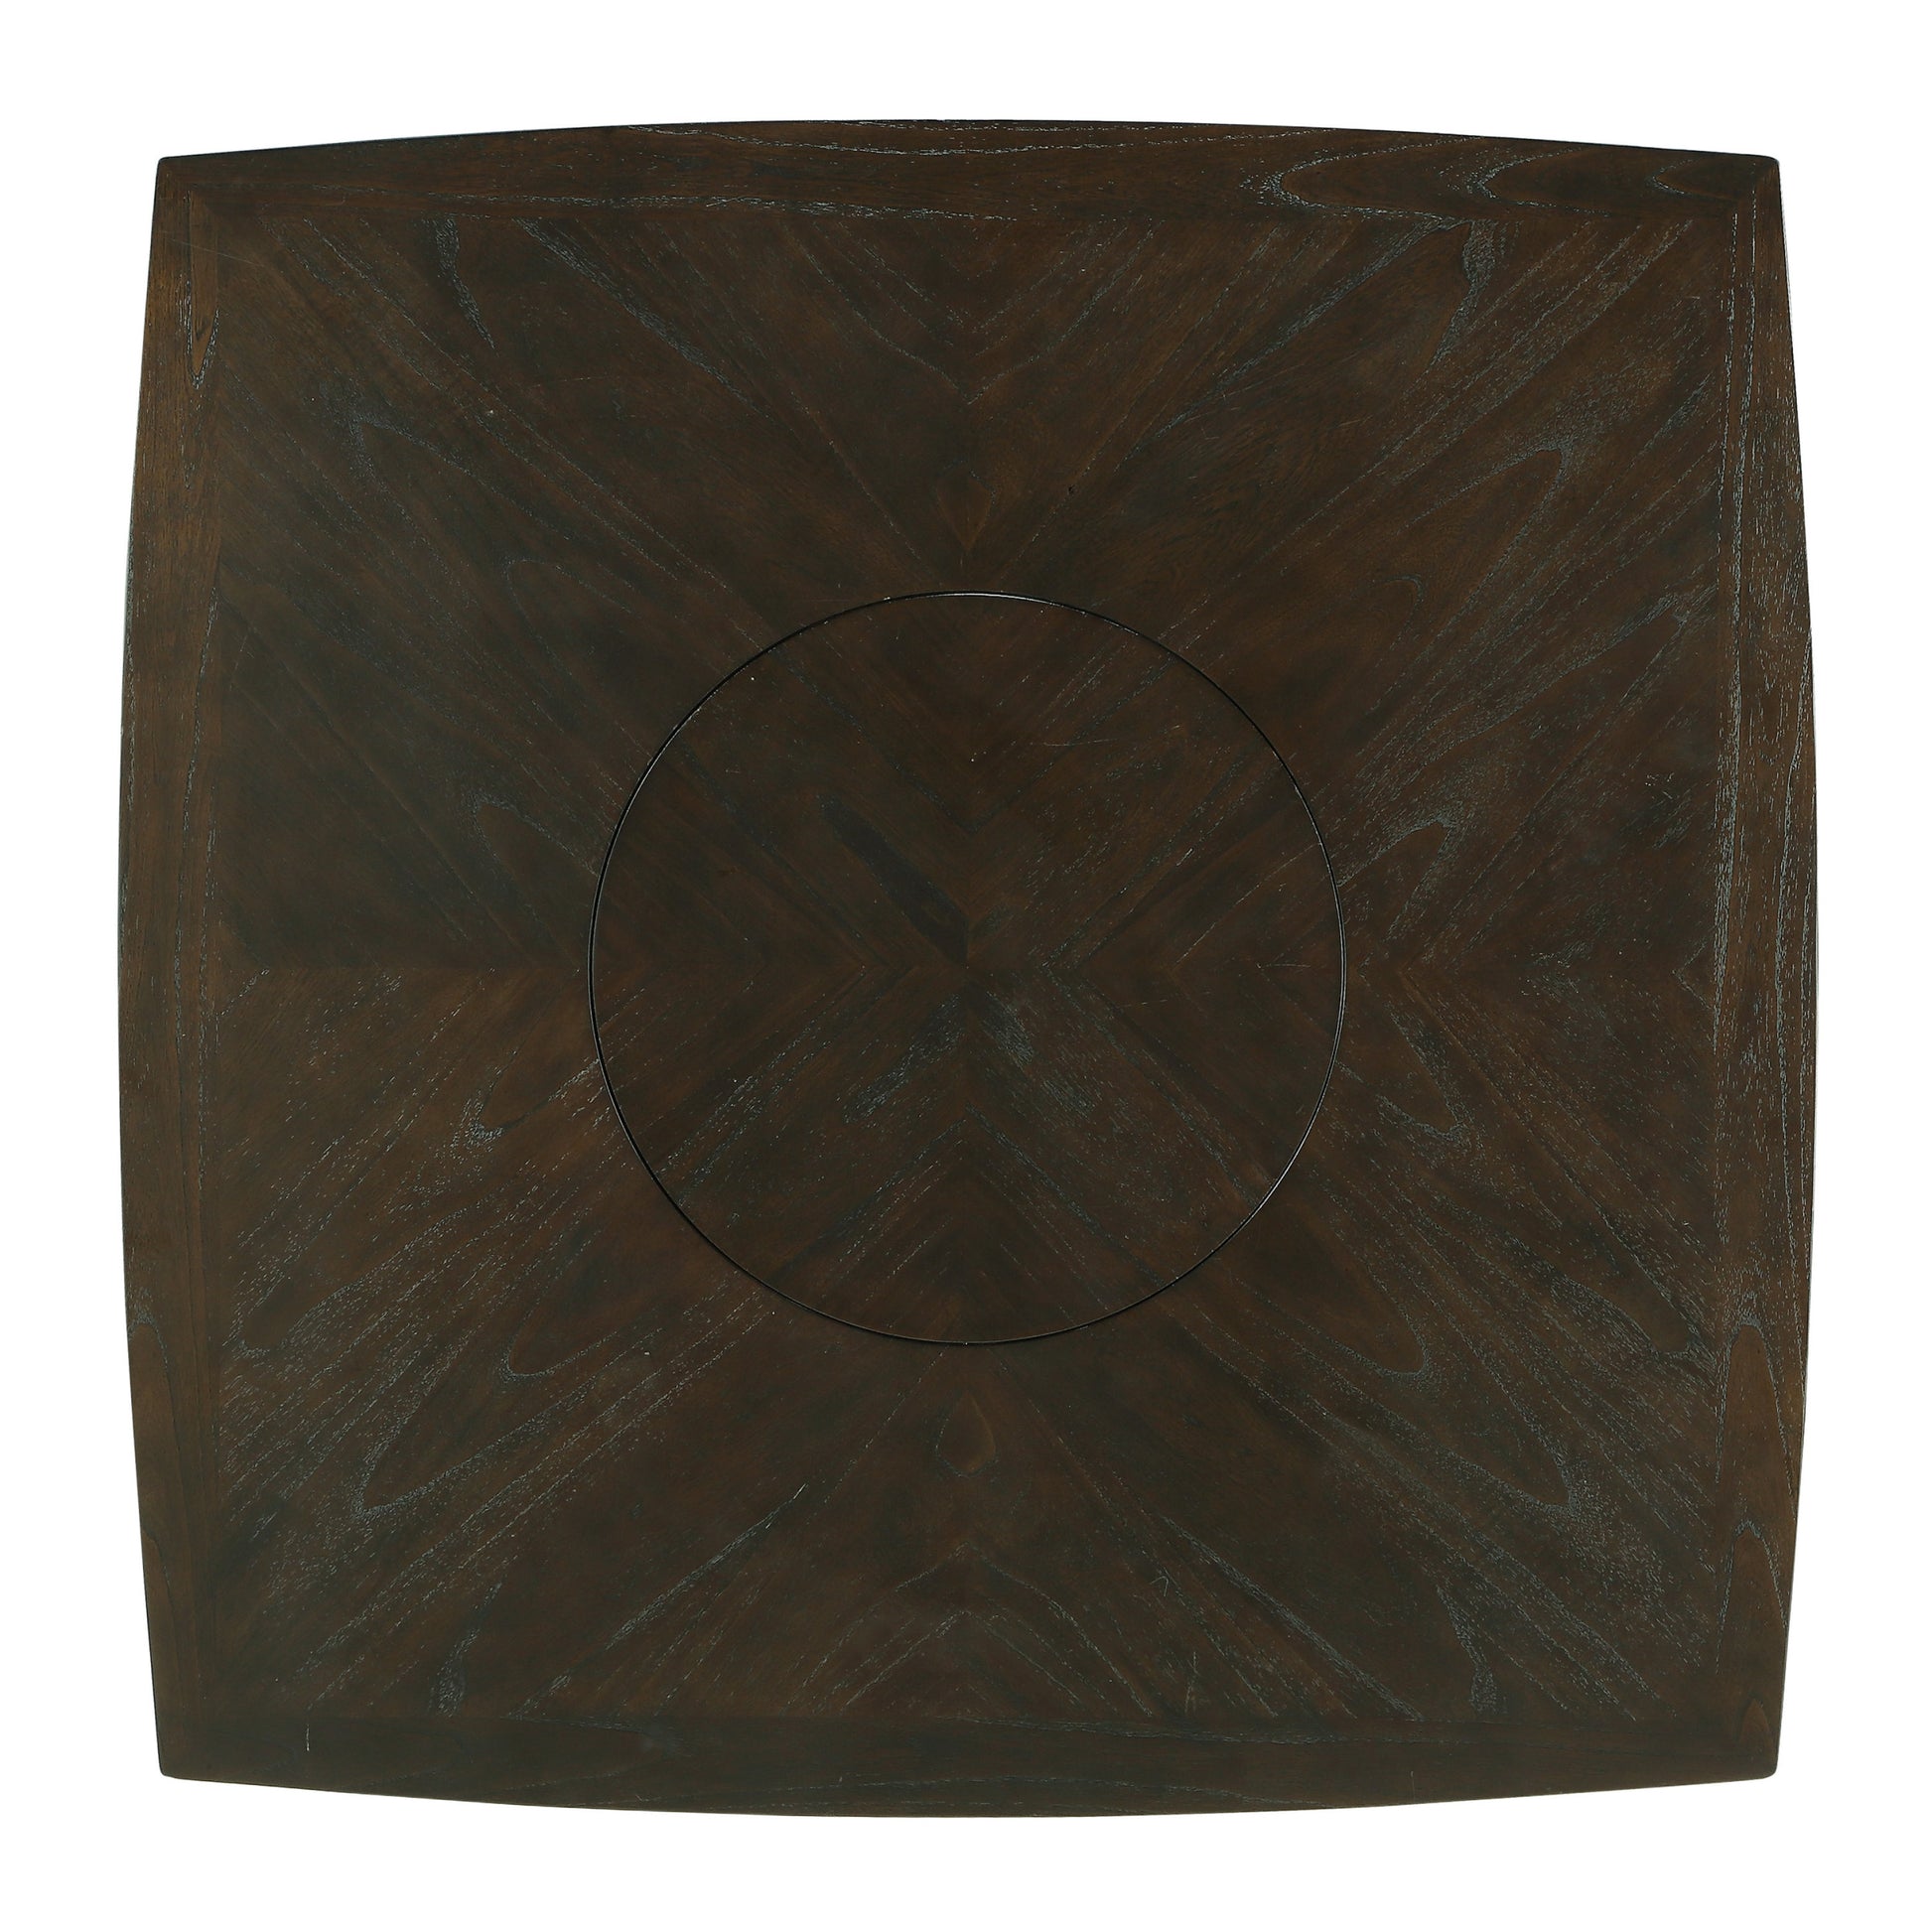 Dark Brown Finish Counter Height Table with Lazy Susan wood-wood-brown mix-seats 6-wood-dining